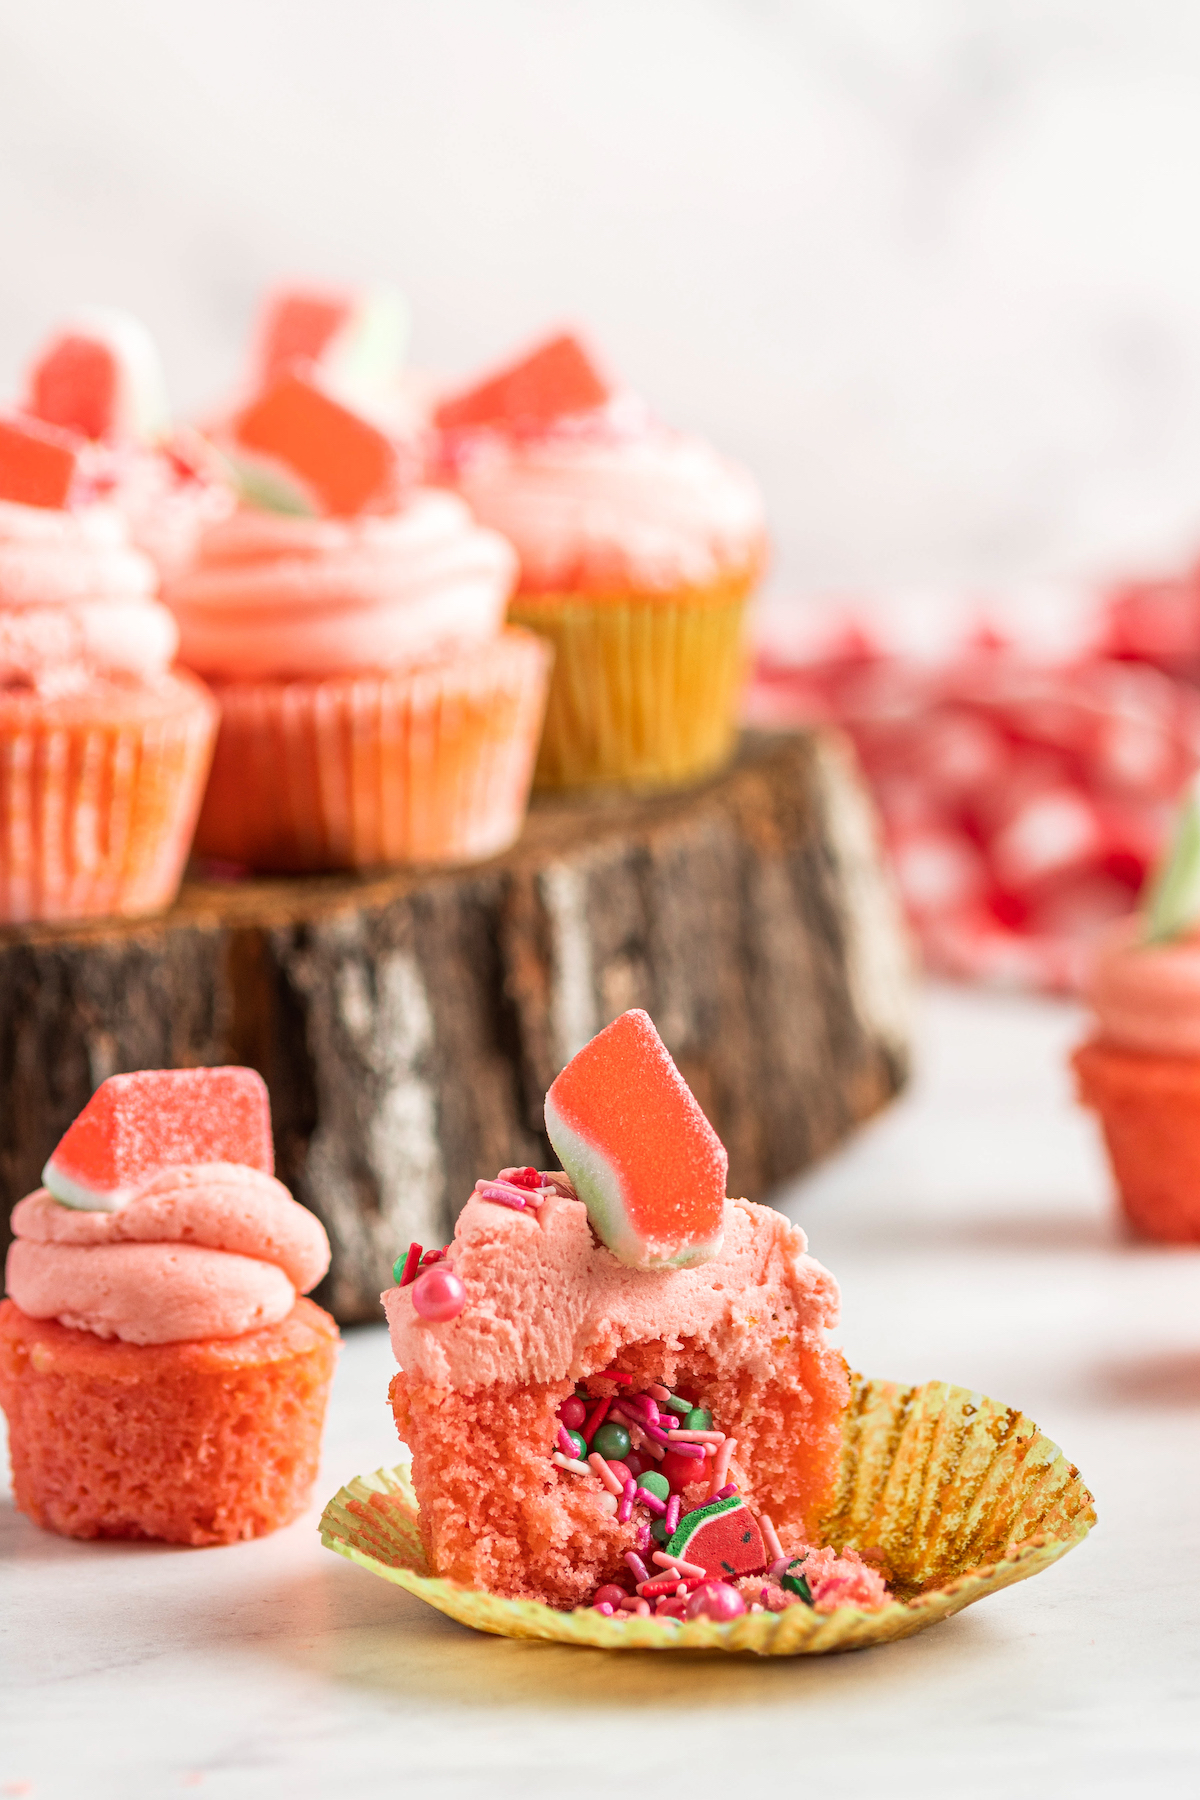 Pink watermelon cupcakes arranged around a decorative slab of wood, with one cupcake cut in half to reveal the surprise sprinkle center.